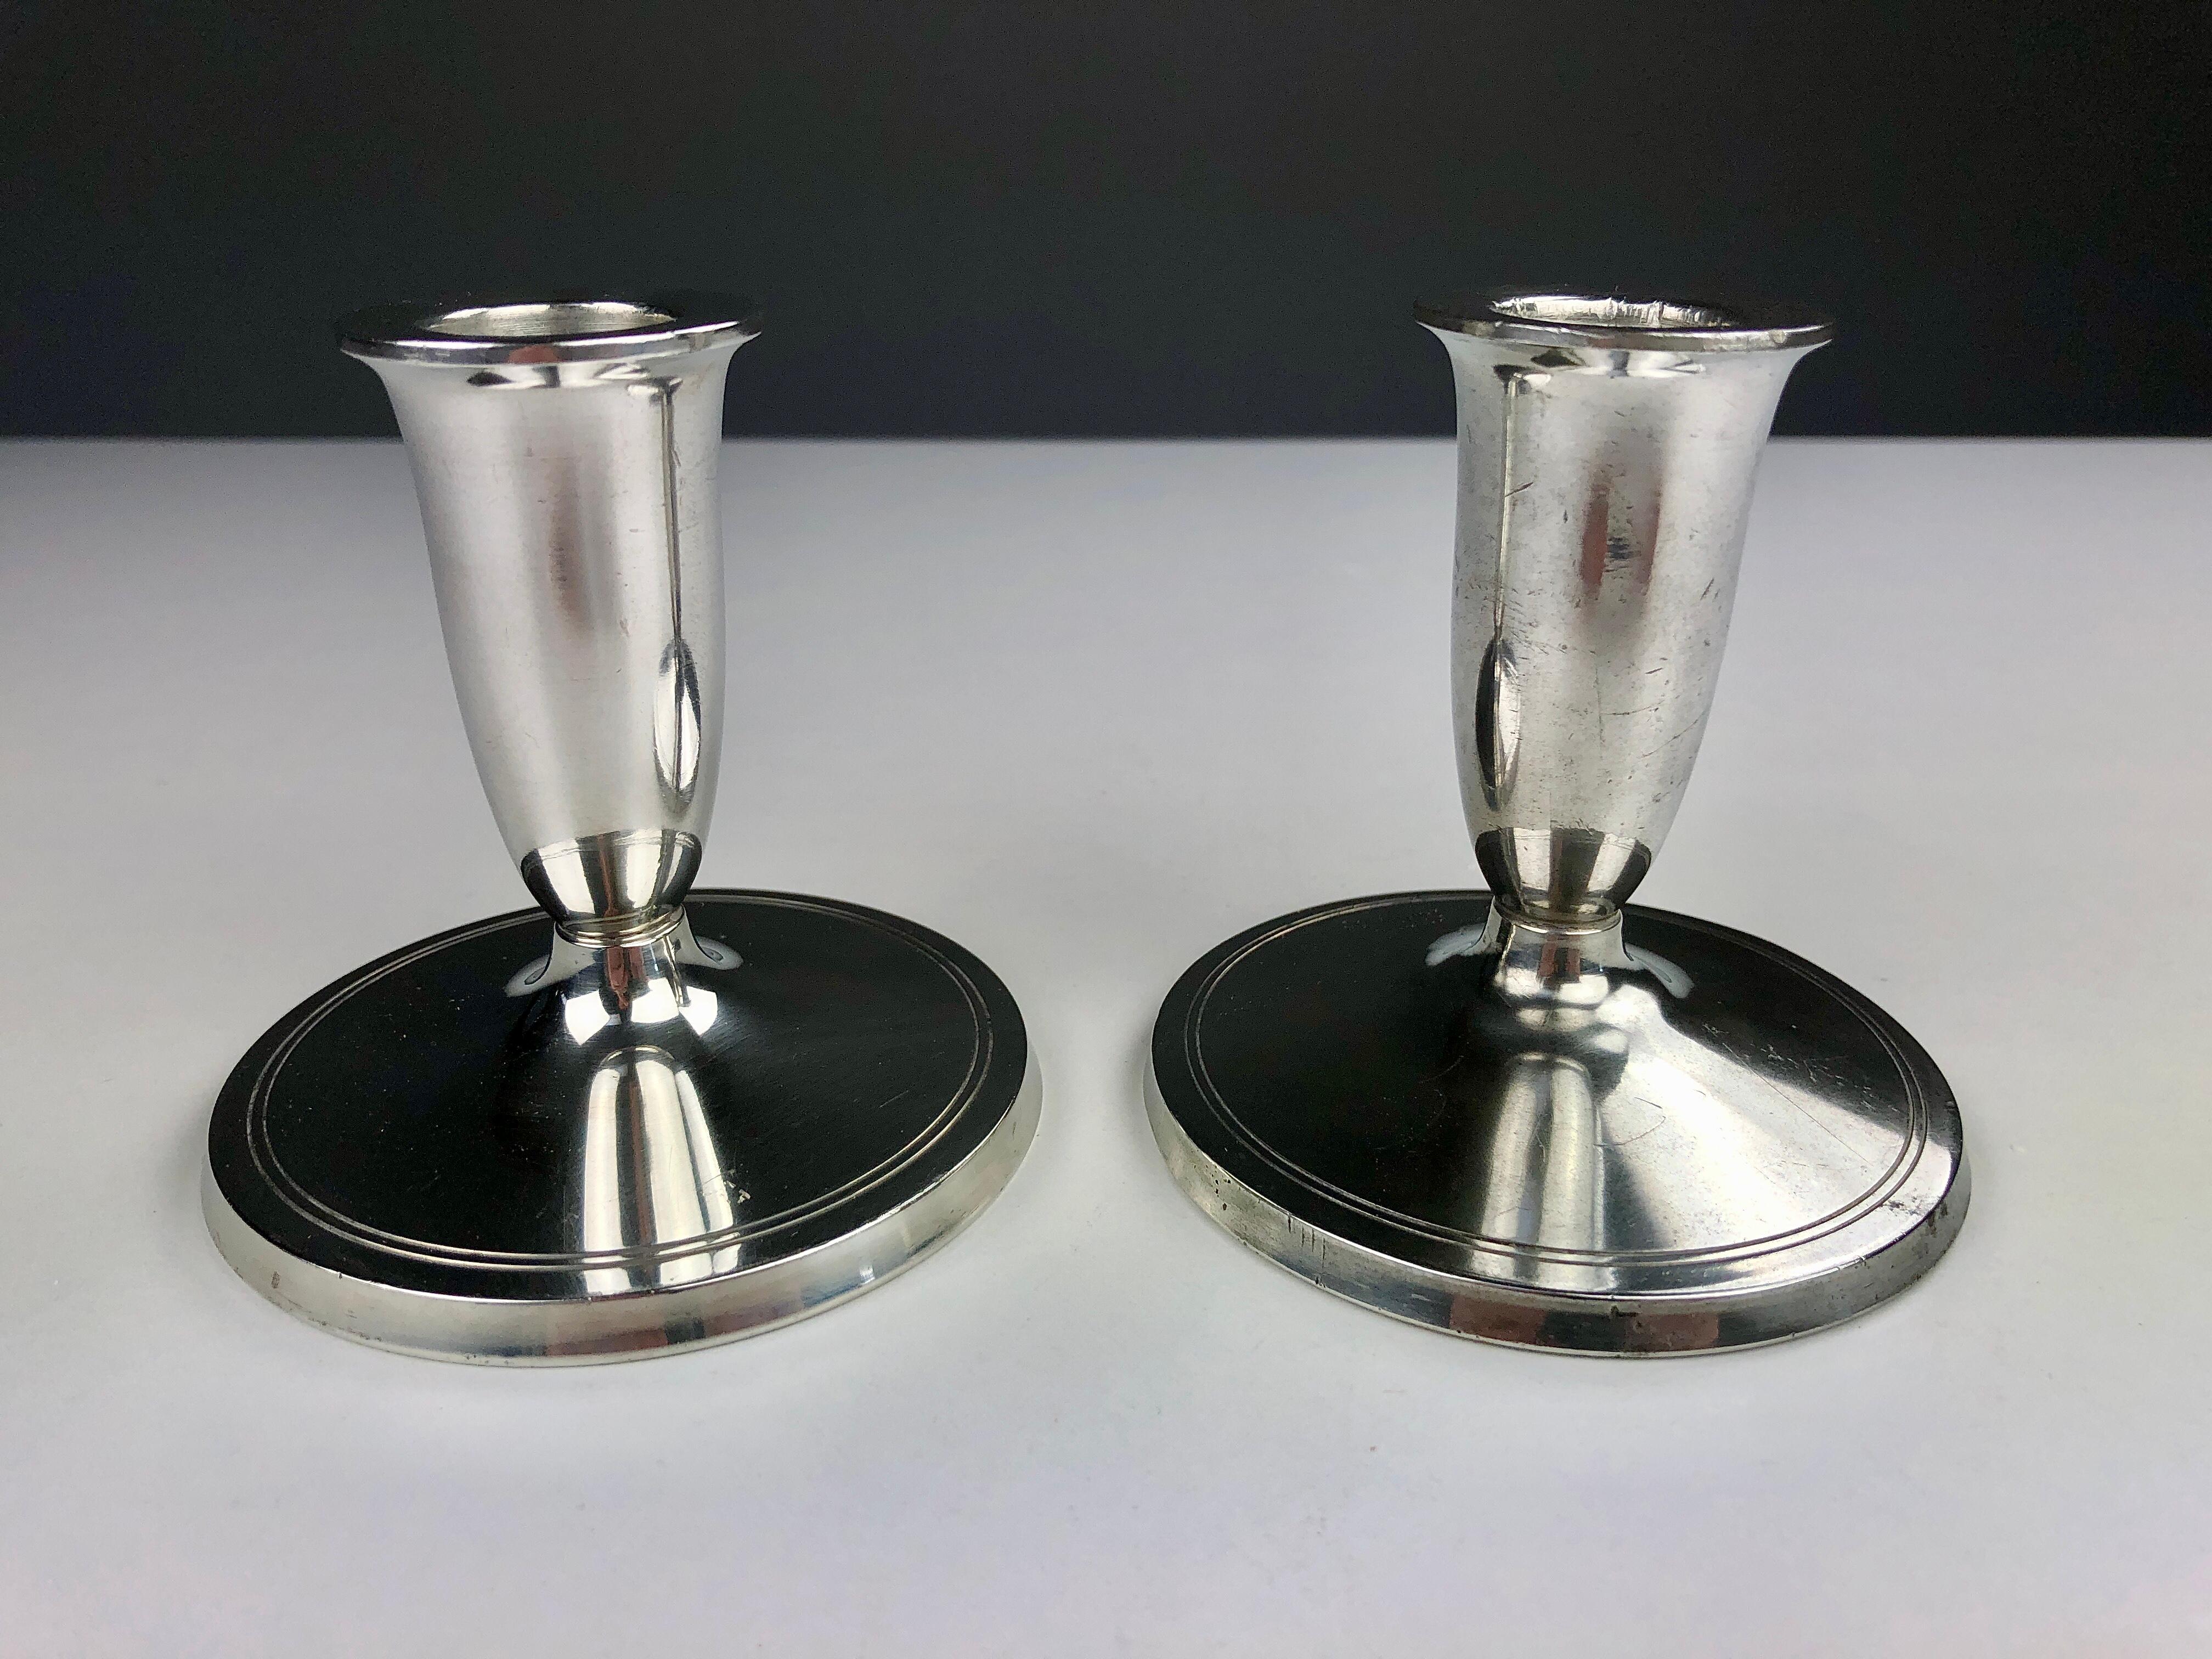 Set of two Danish Just Andersen art deco pewter candle holders produced by Just Andersen A/S in the 1940's.

The candle holders are in good vintage condition and marked with Just. Andersens triangle mark. 

Just Andersen 1884-1943 was born in